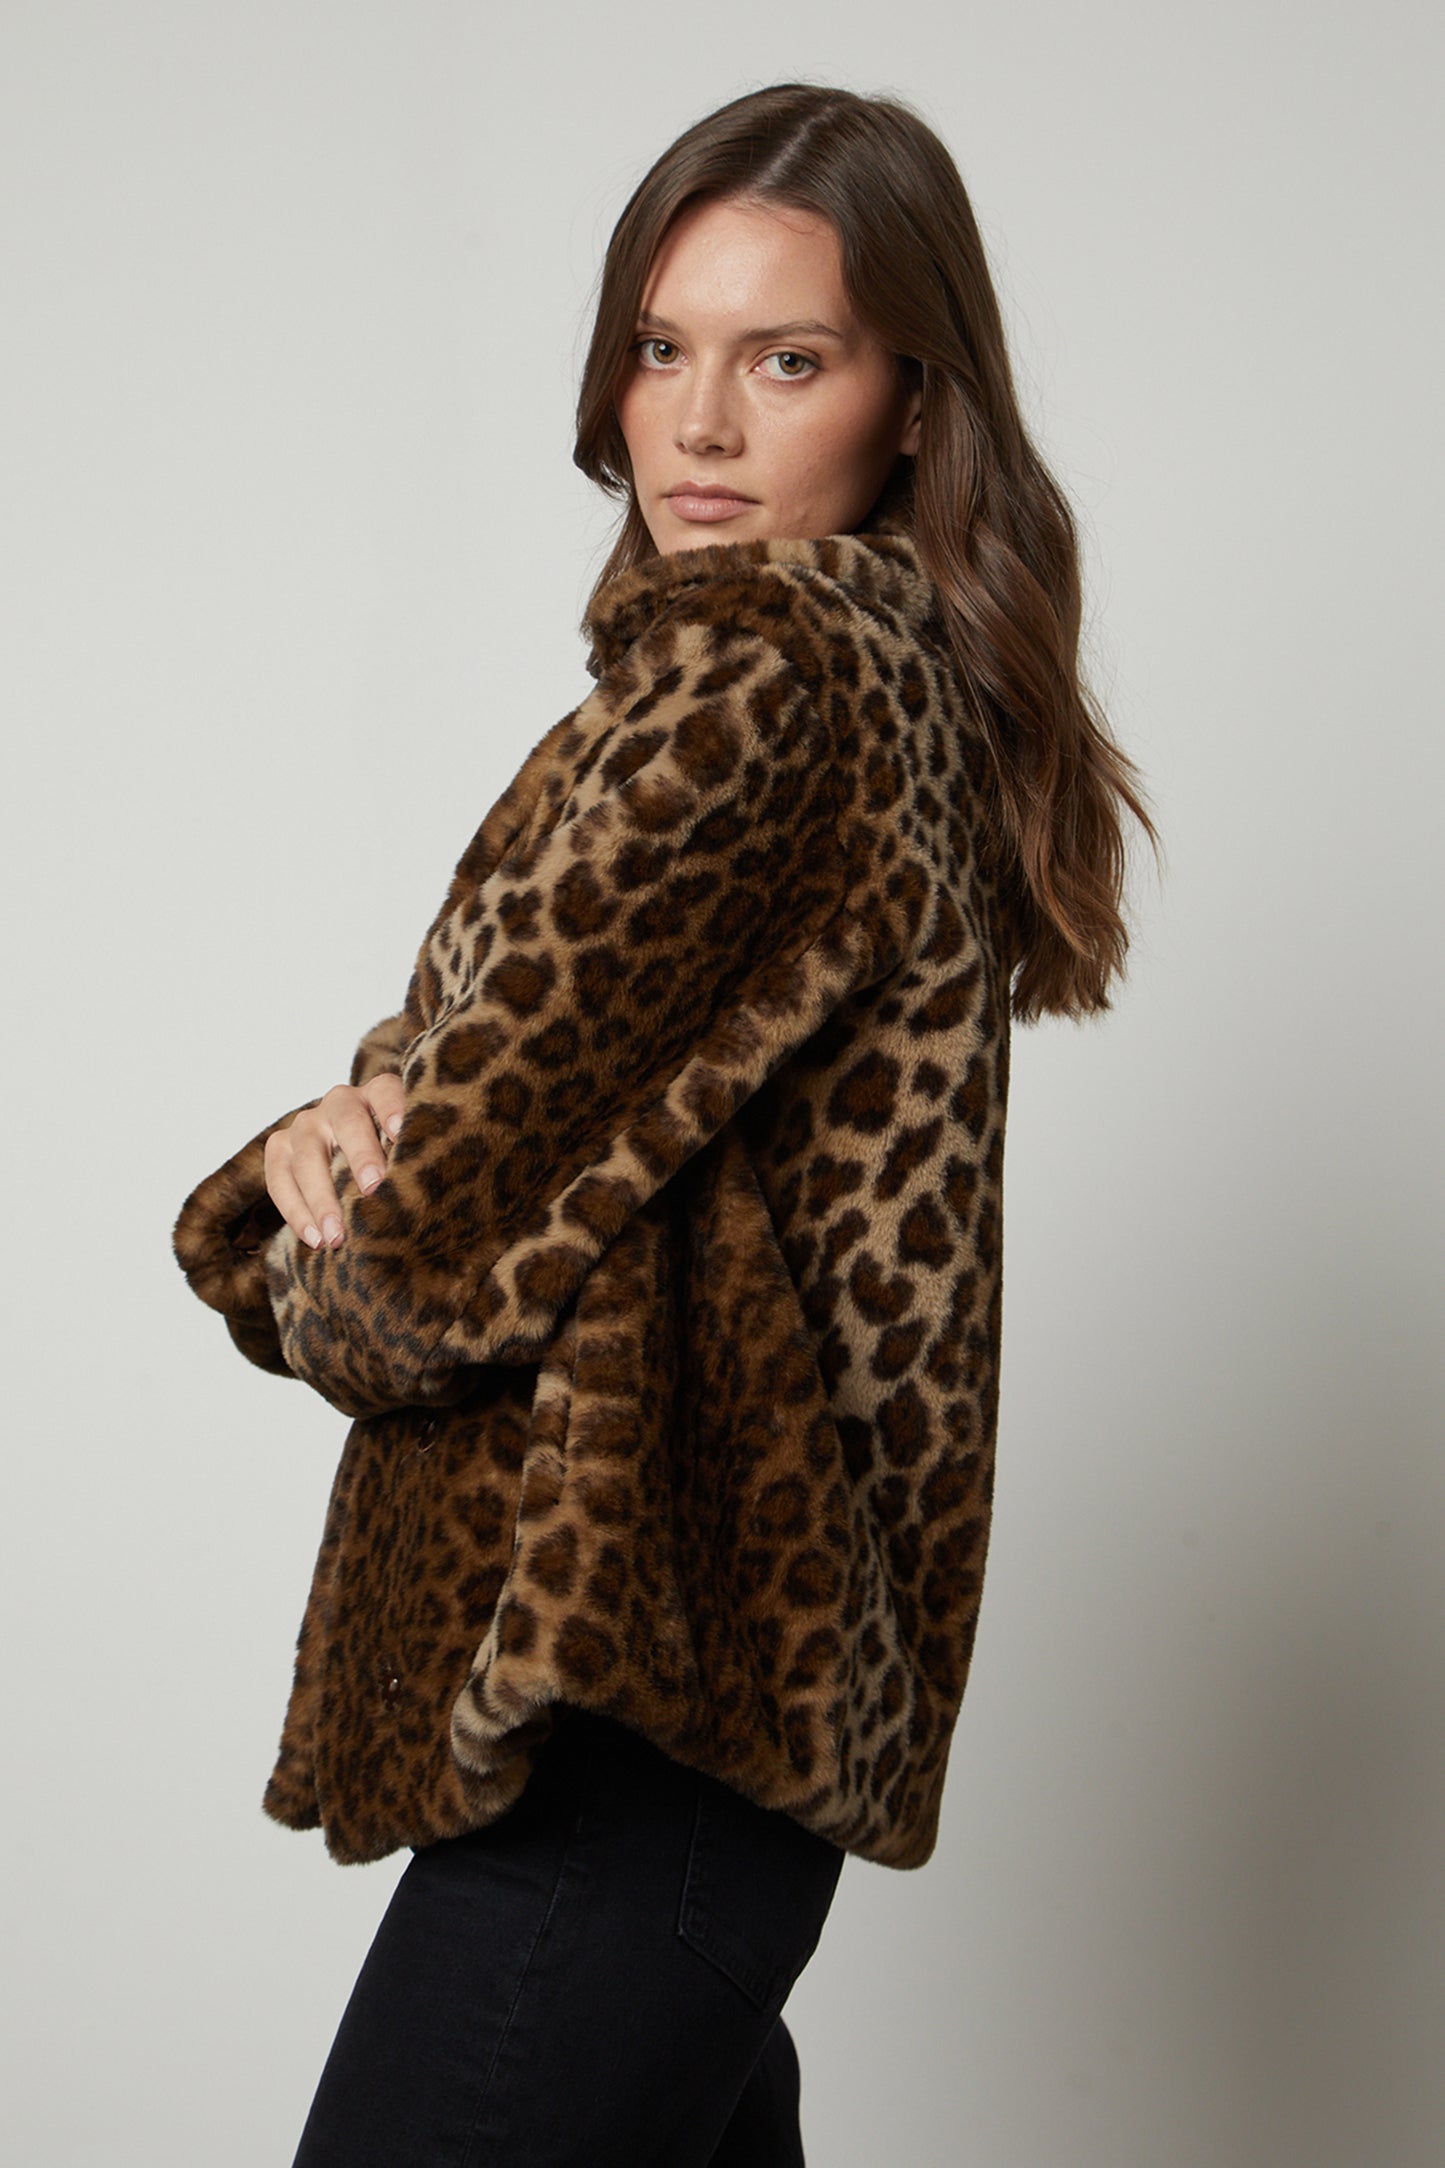 A woman wearing a AMANI LEOPARD LUX FAUX FUR JACKET by Velvet by Graham & Spencer in a double breasted style.-35626121330881